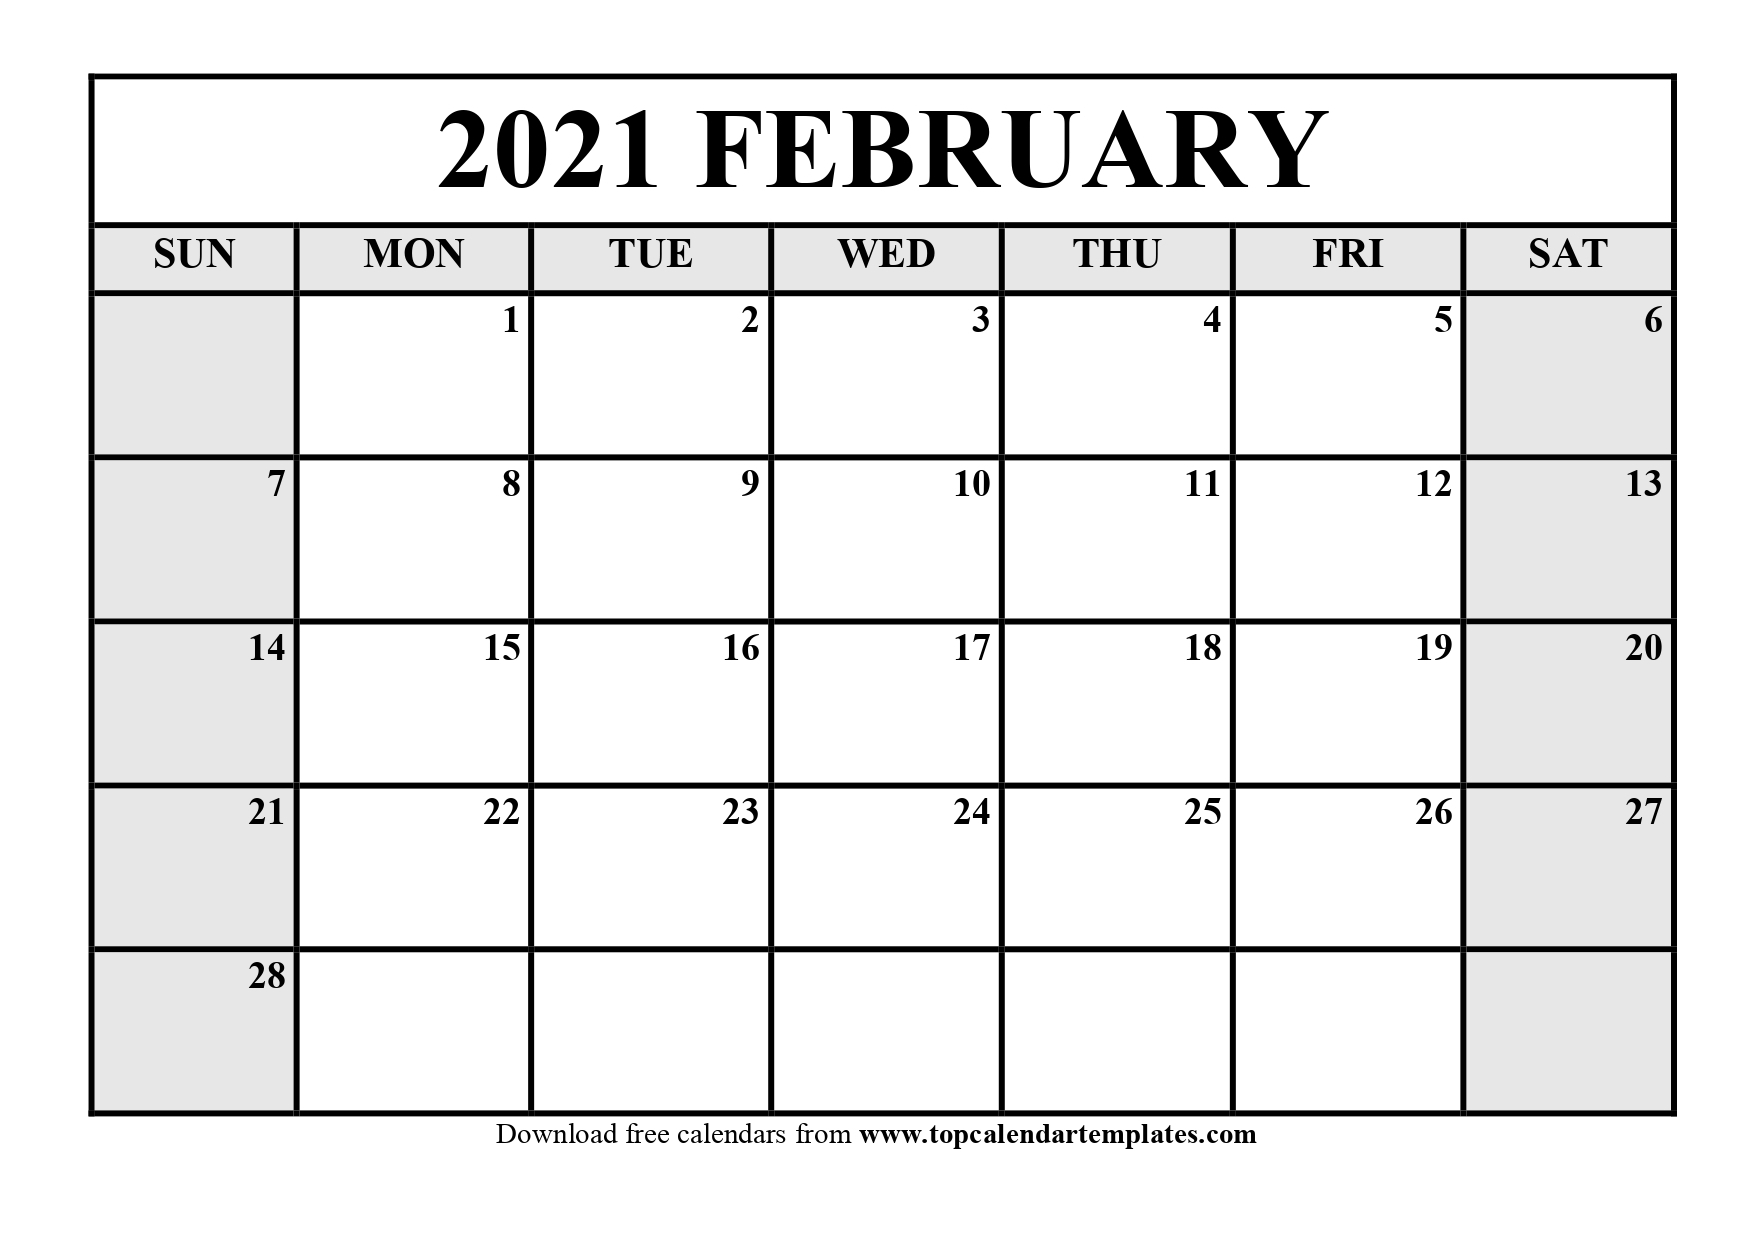 2021 Print Free Calendars Without Downloading | Calendar